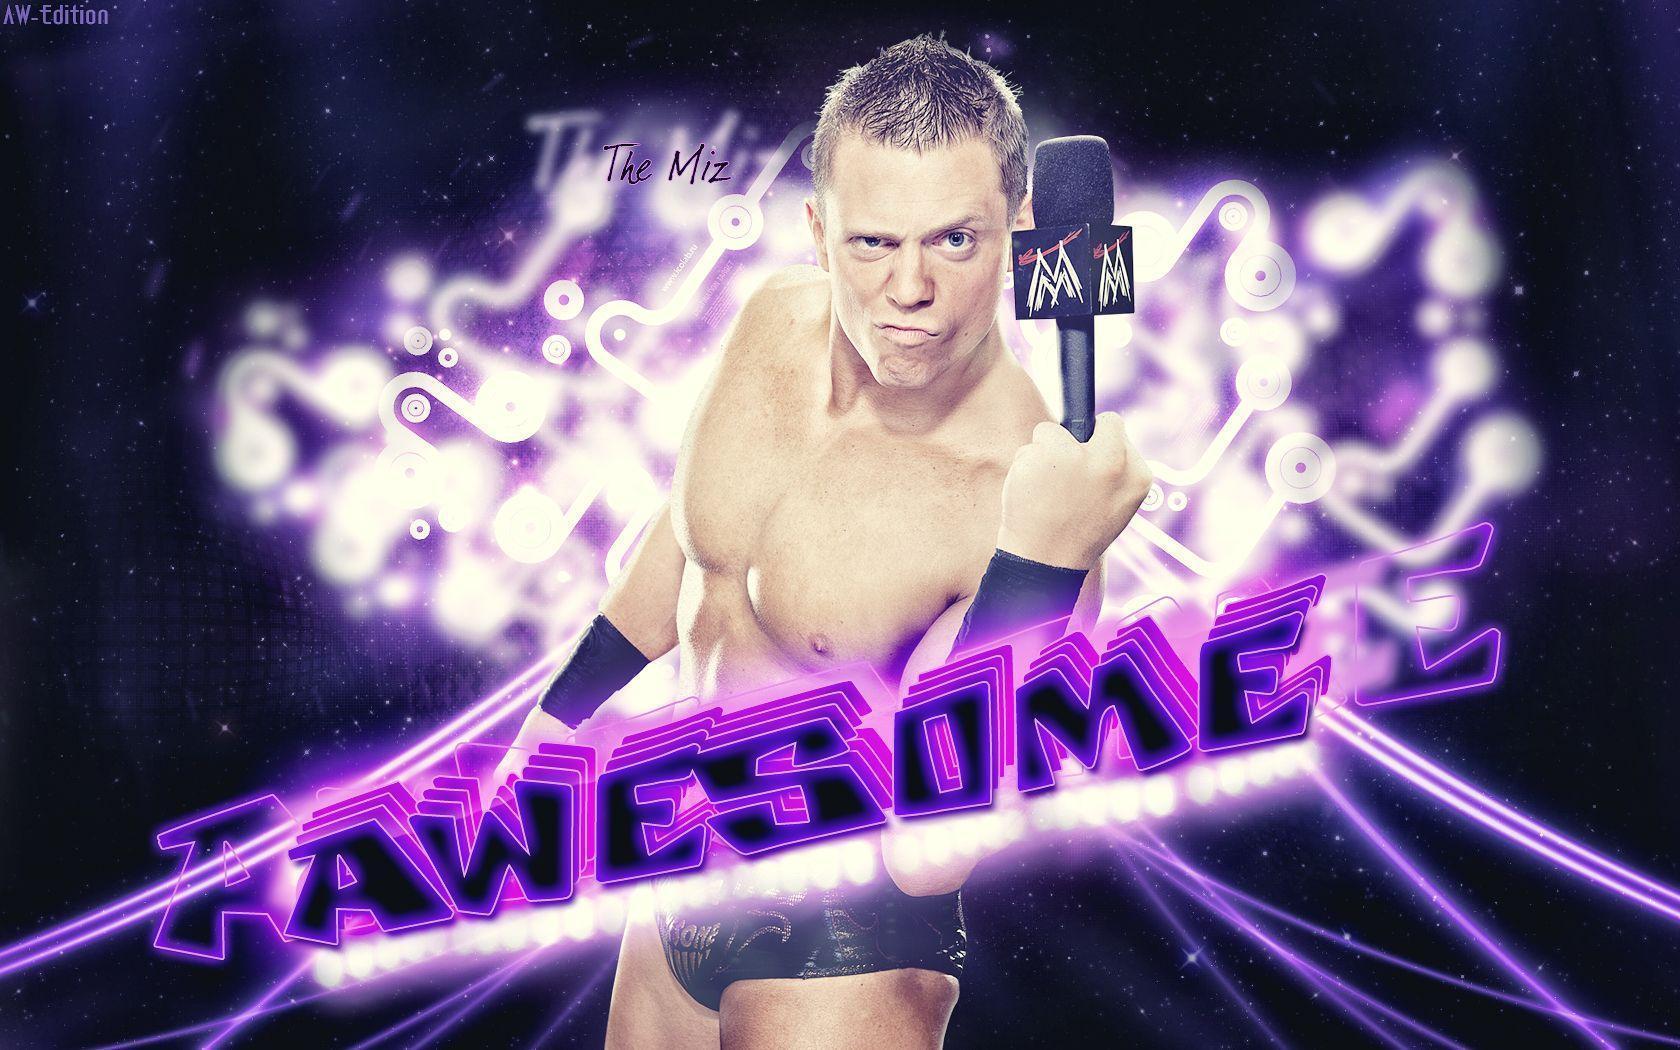 New WWE Wallpapers The Miz By AW.